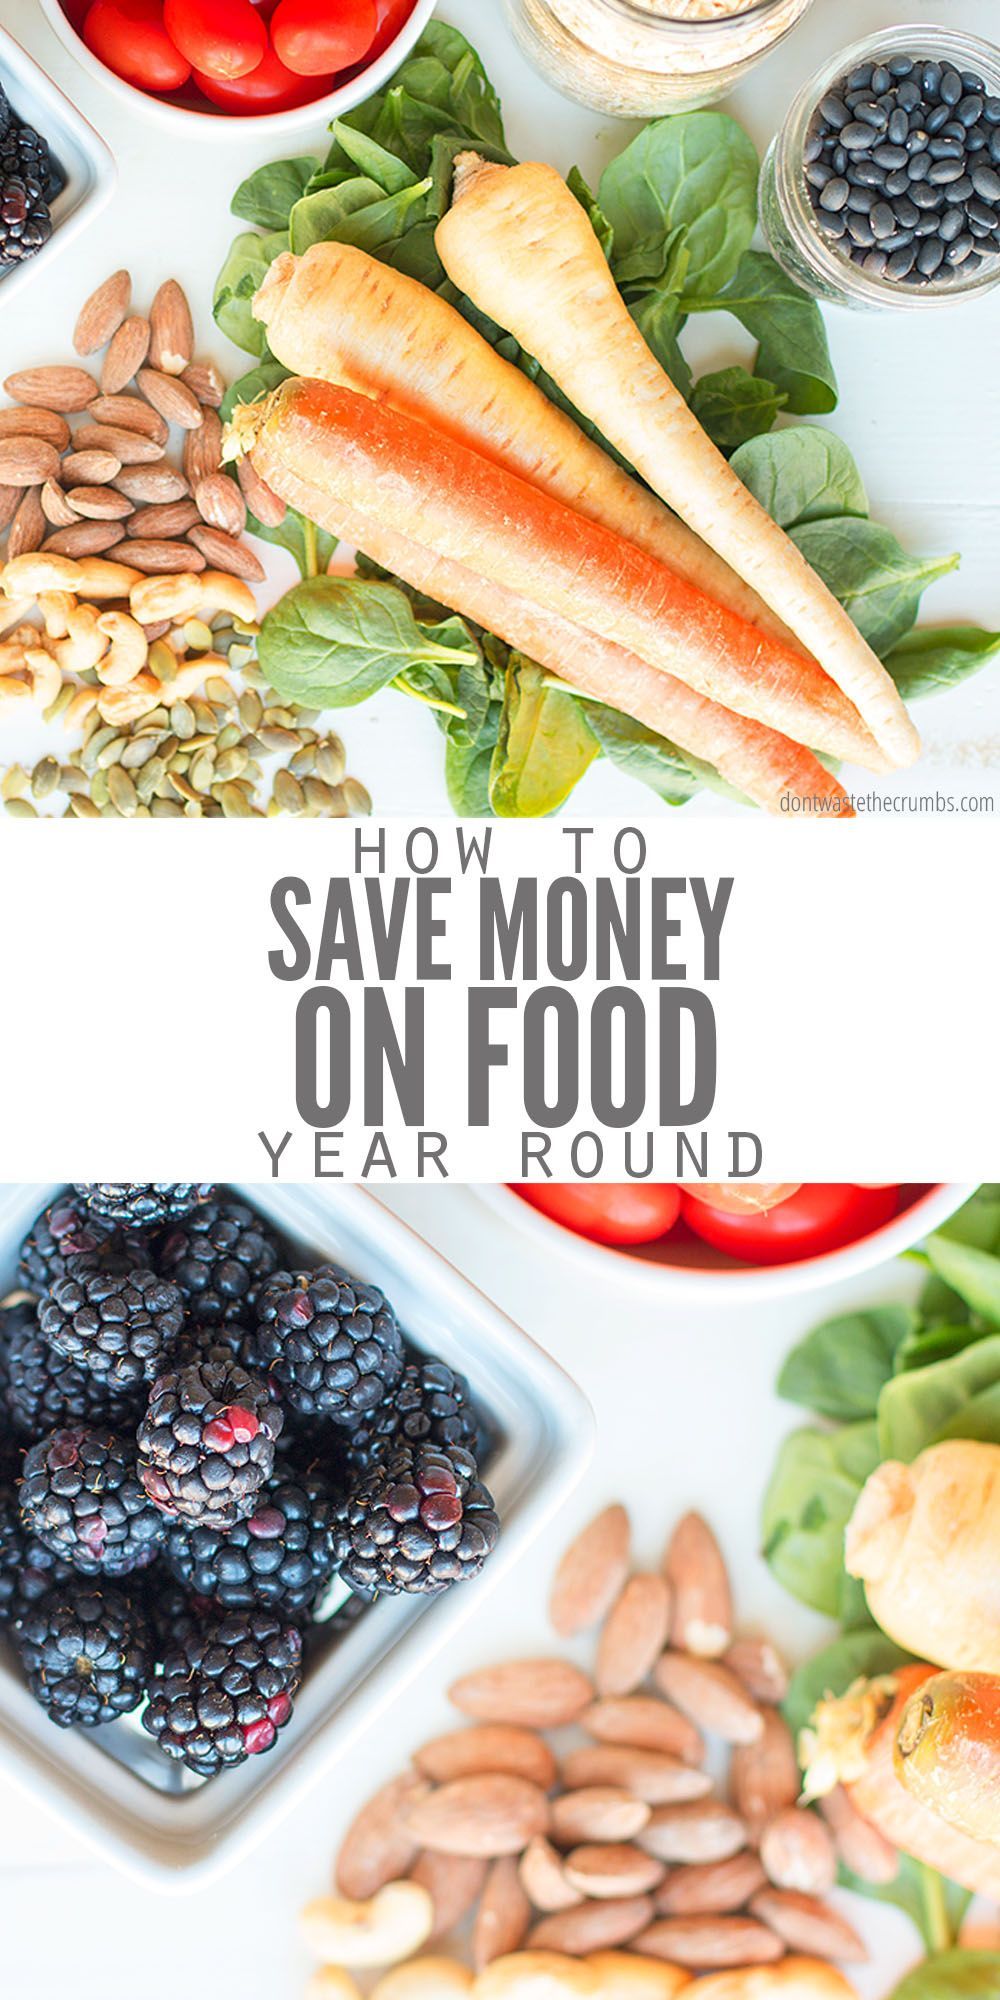 38 Ways to Save Money on Food Year Round -   14 healthy recipes On A Budget cleanses ideas